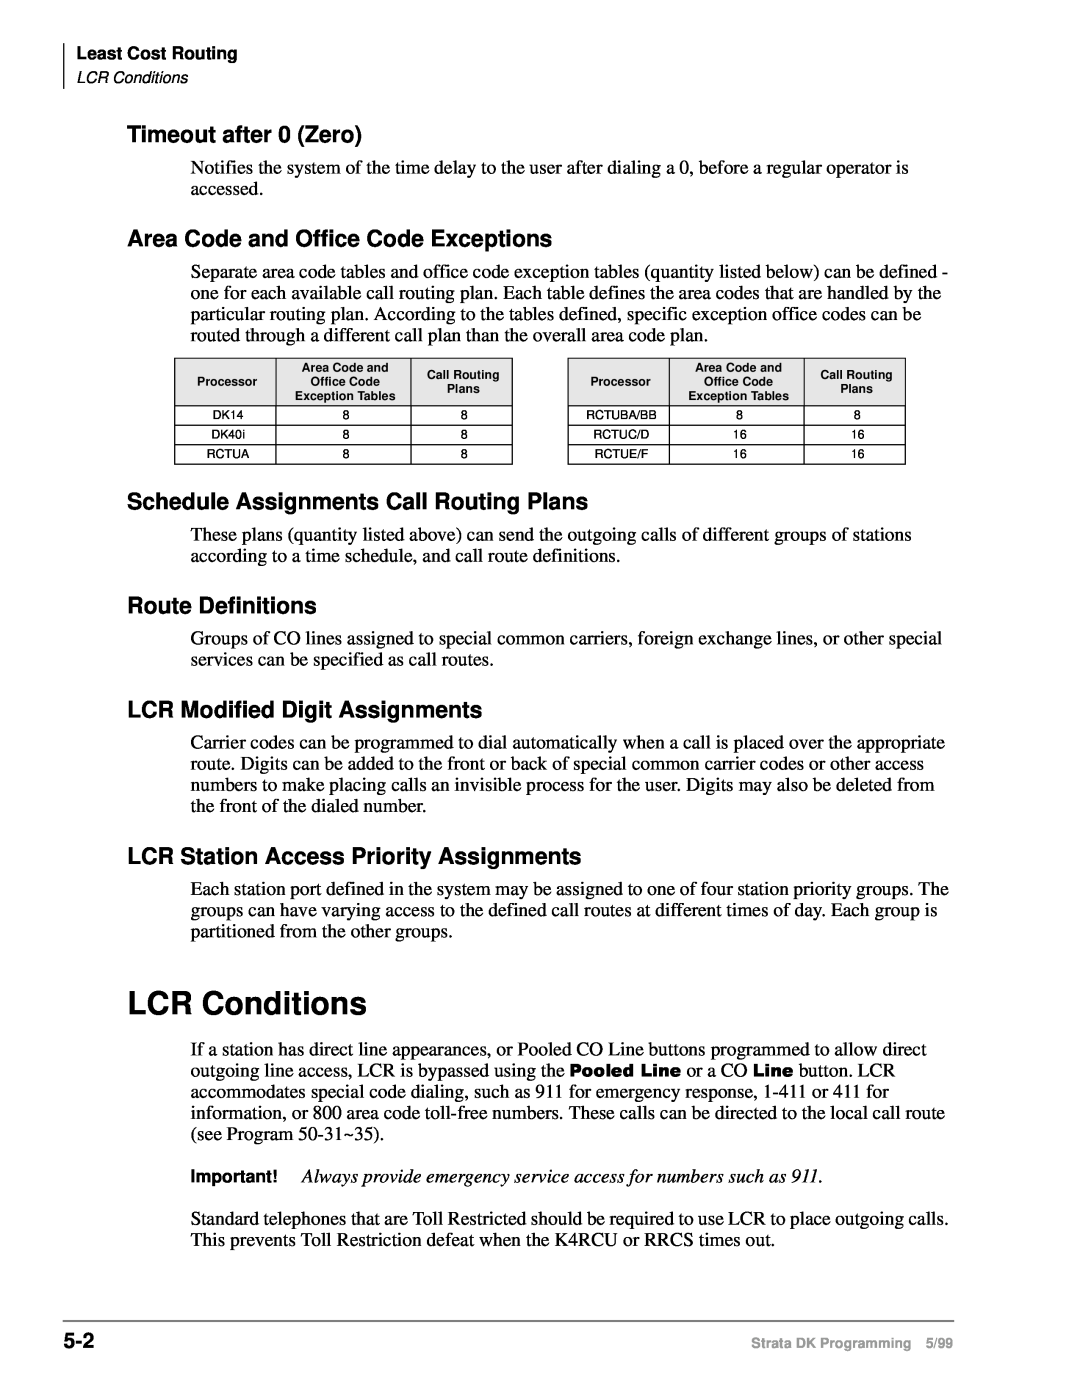 Toshiba dk14 manual LCR Conditions, Timeout after 0 Zero, Area Code and Office Code Exceptions, Route Definitions 